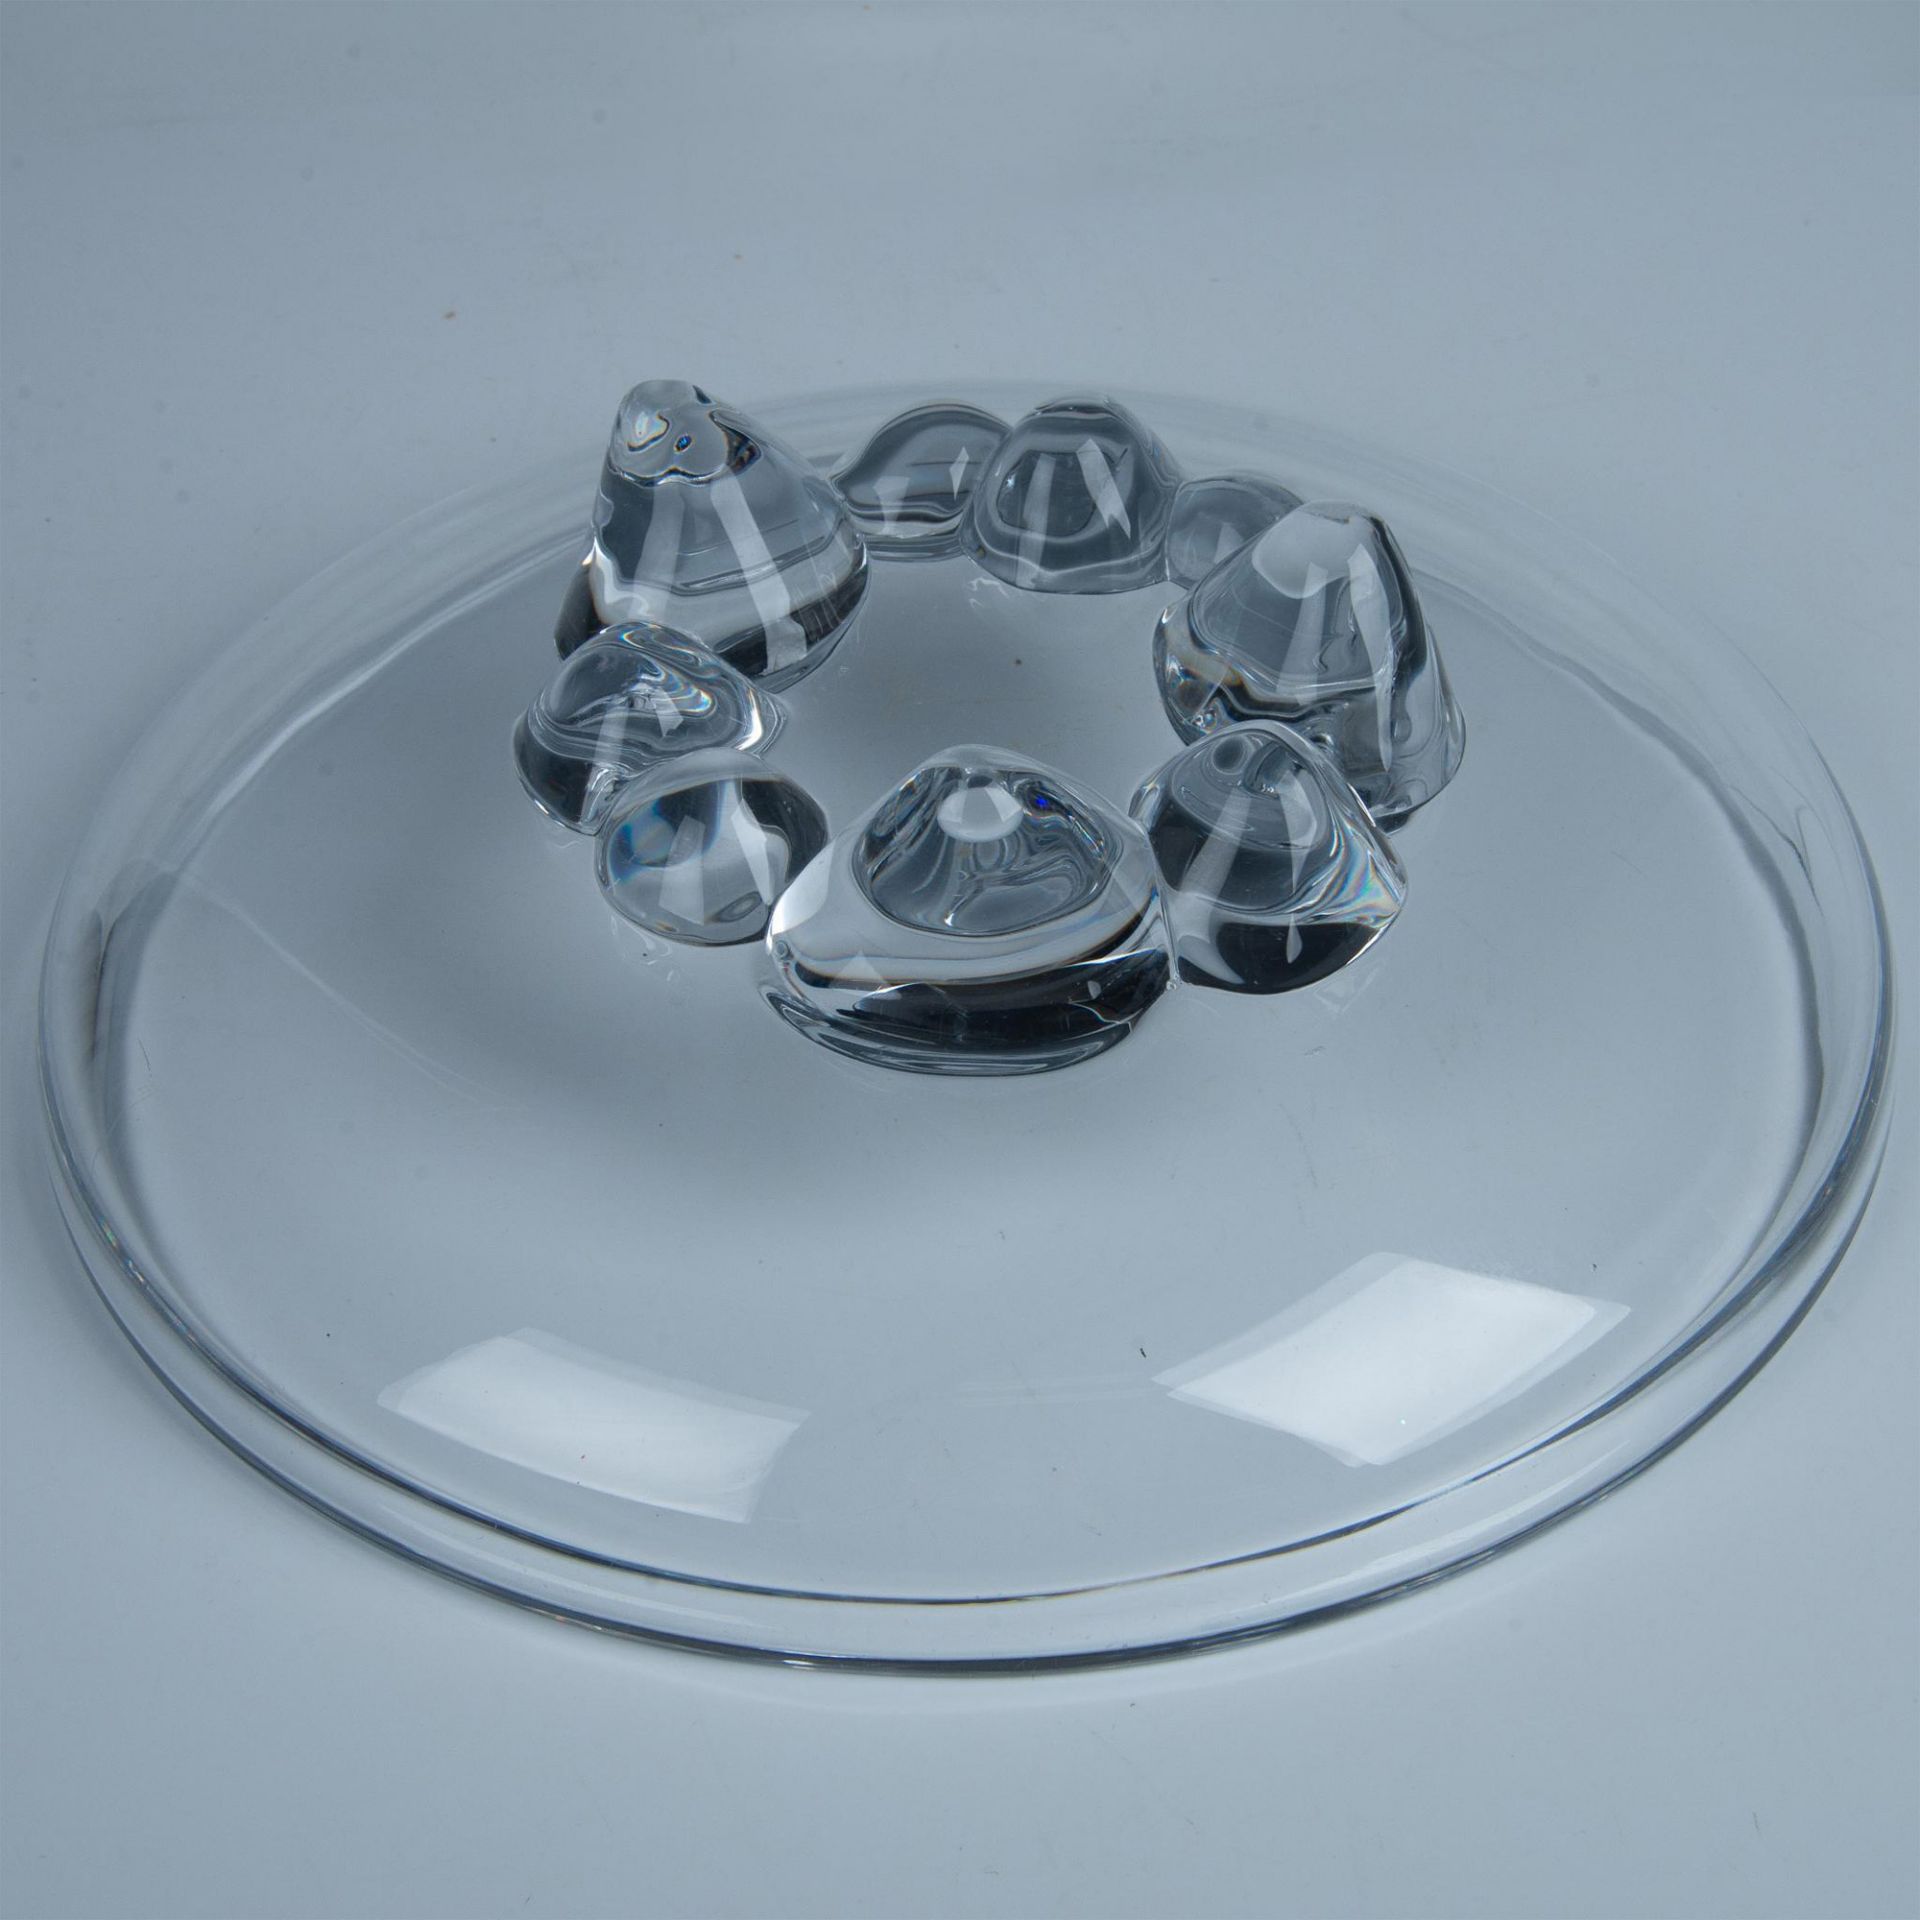 Daum Nancy Crystal Centerpiece Bowl with Conical Feet - Image 4 of 5